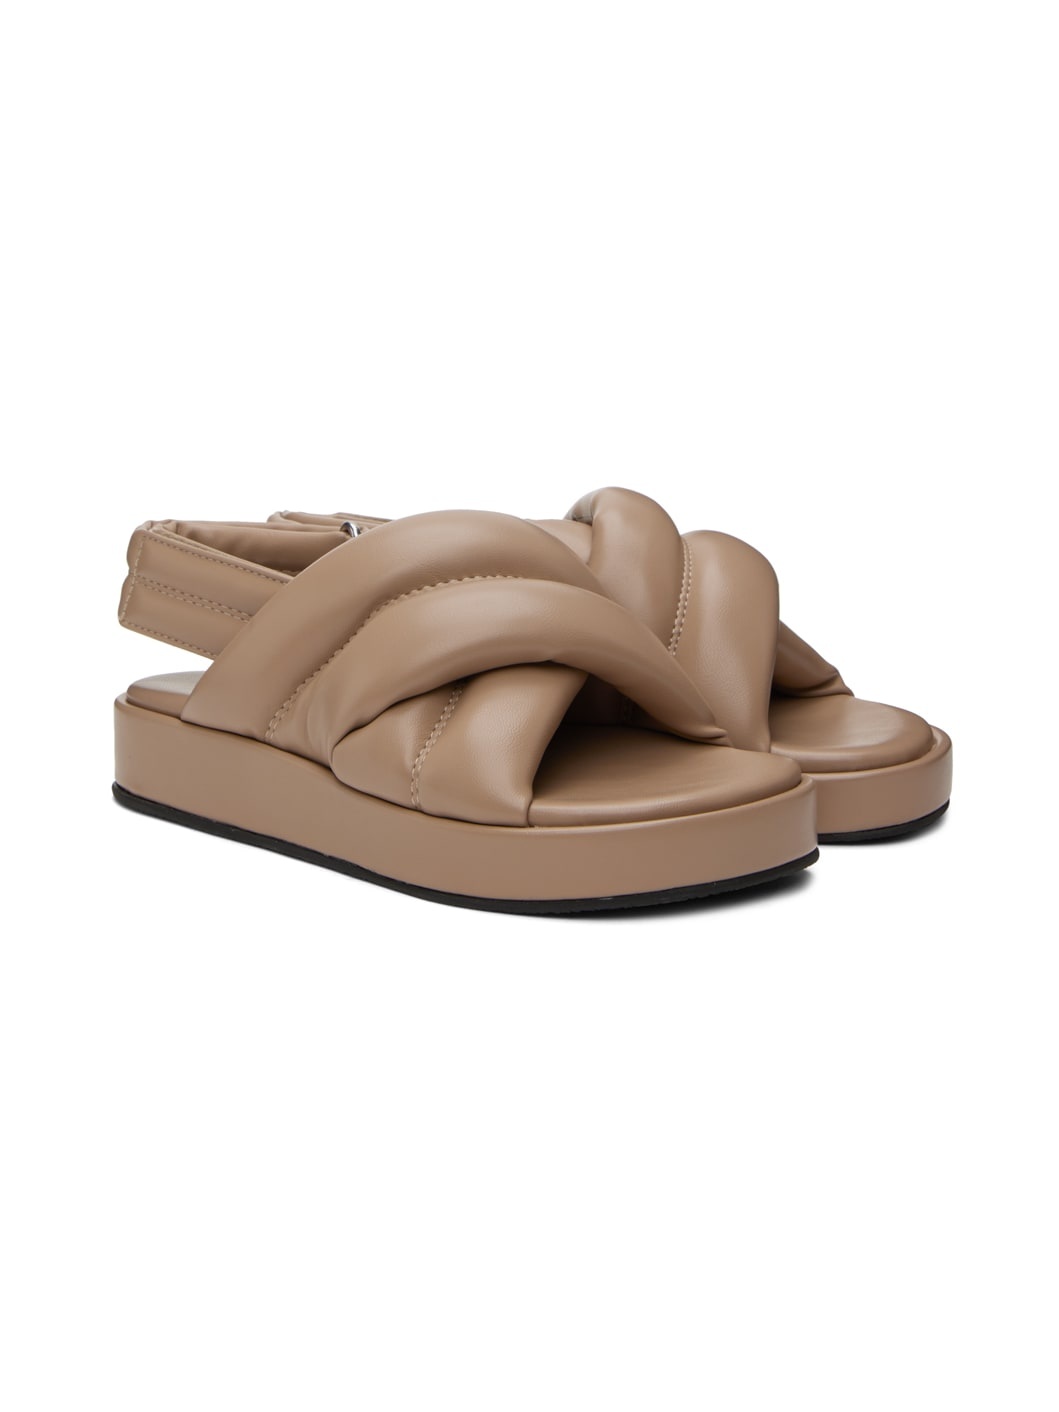 Taupe Spencer Sandals - 4